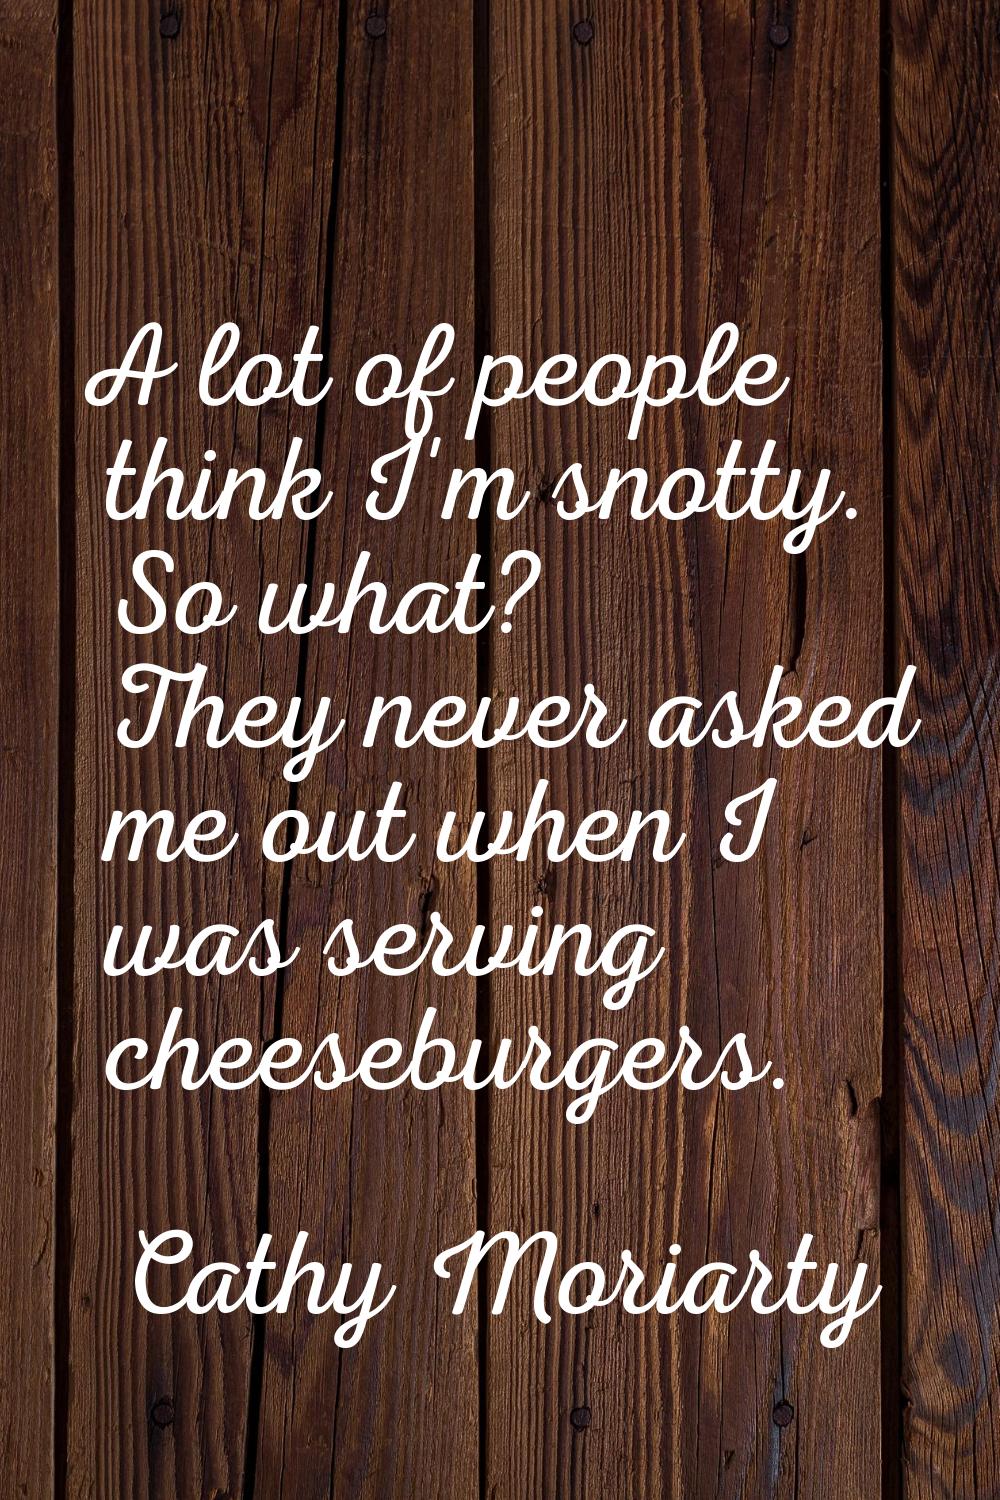 A lot of people think I'm snotty. So what? They never asked me out when I was serving cheeseburgers